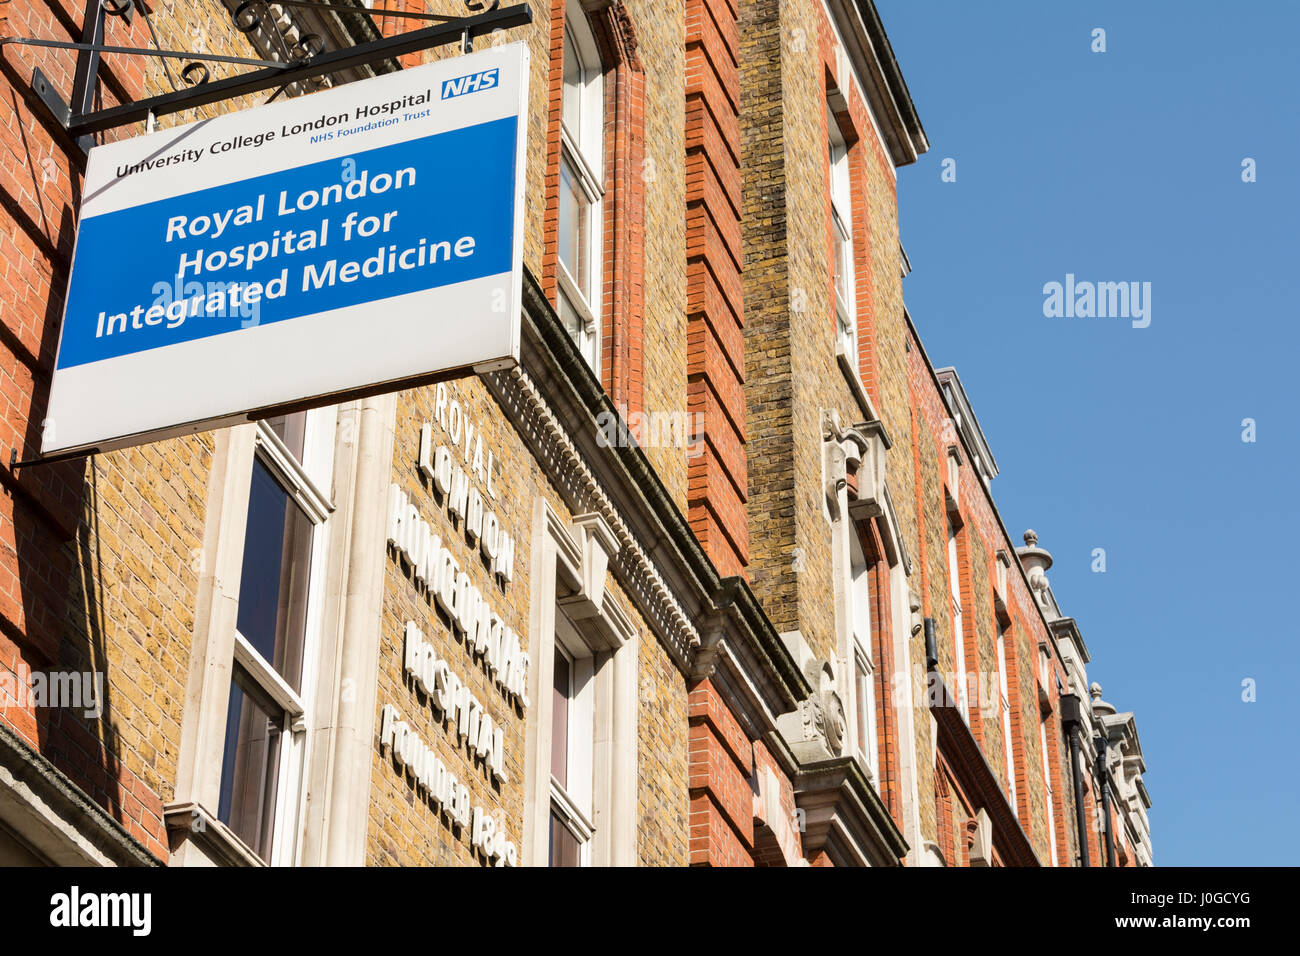 The exterior of the Royal London Hospital for Integrated Medicine on Queen Square, London, UK Stock Photo